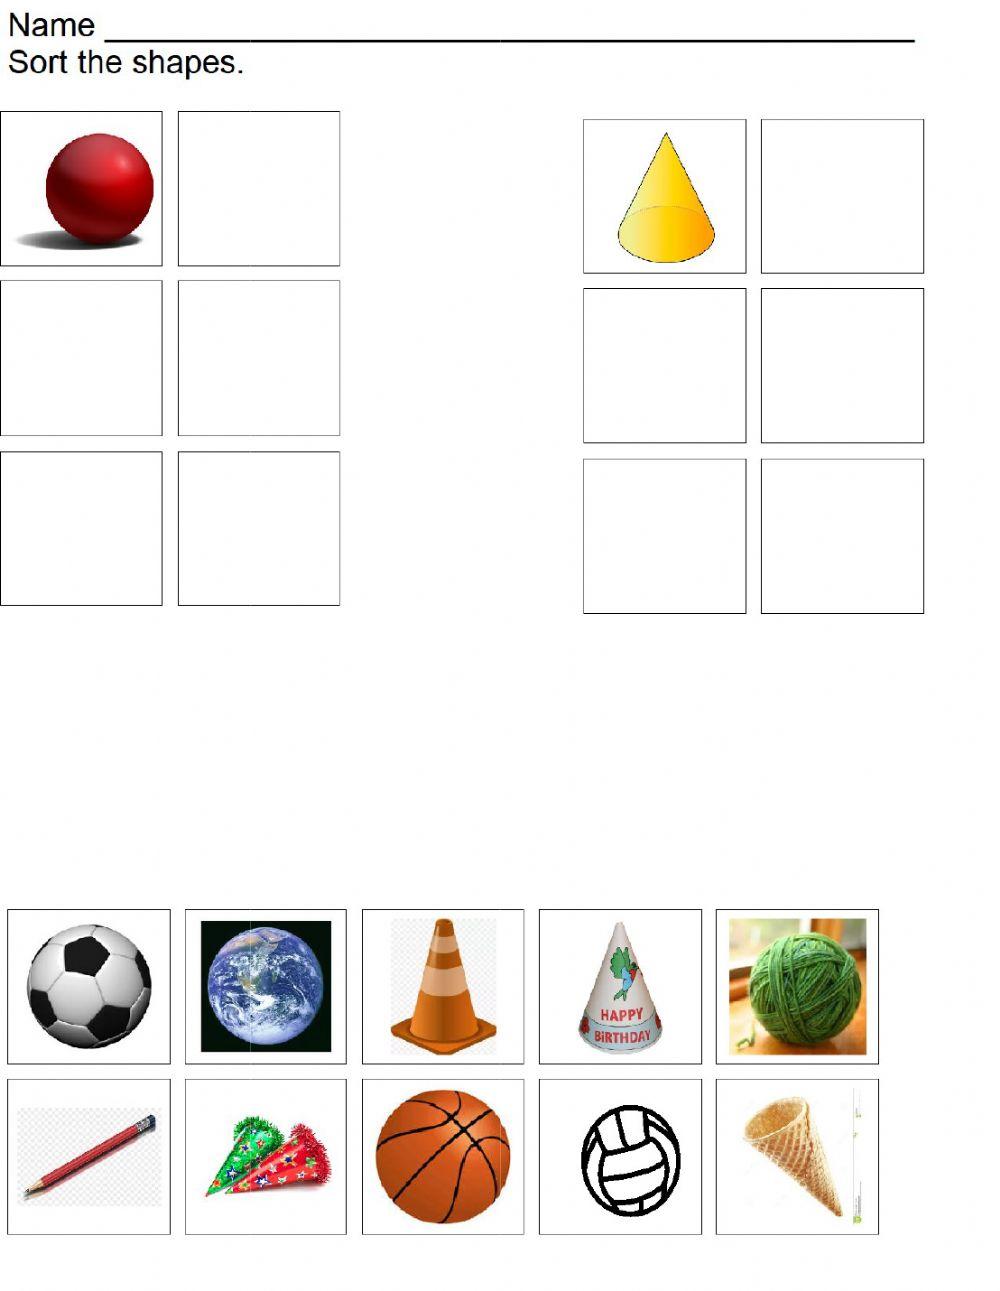 Sphere and Cone sort